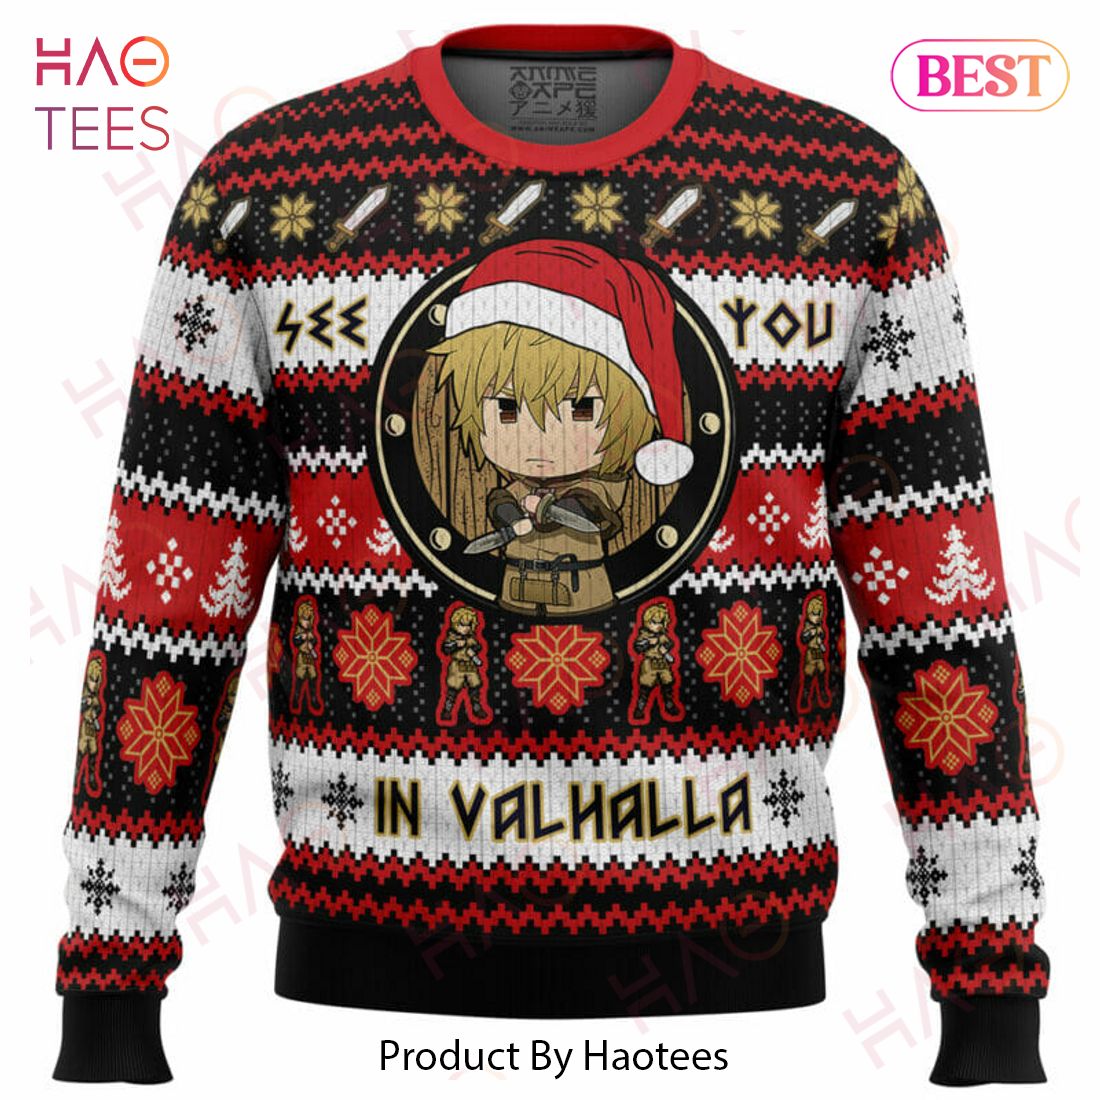 See You in Valhalla Vinland Saga Christmas Sweater